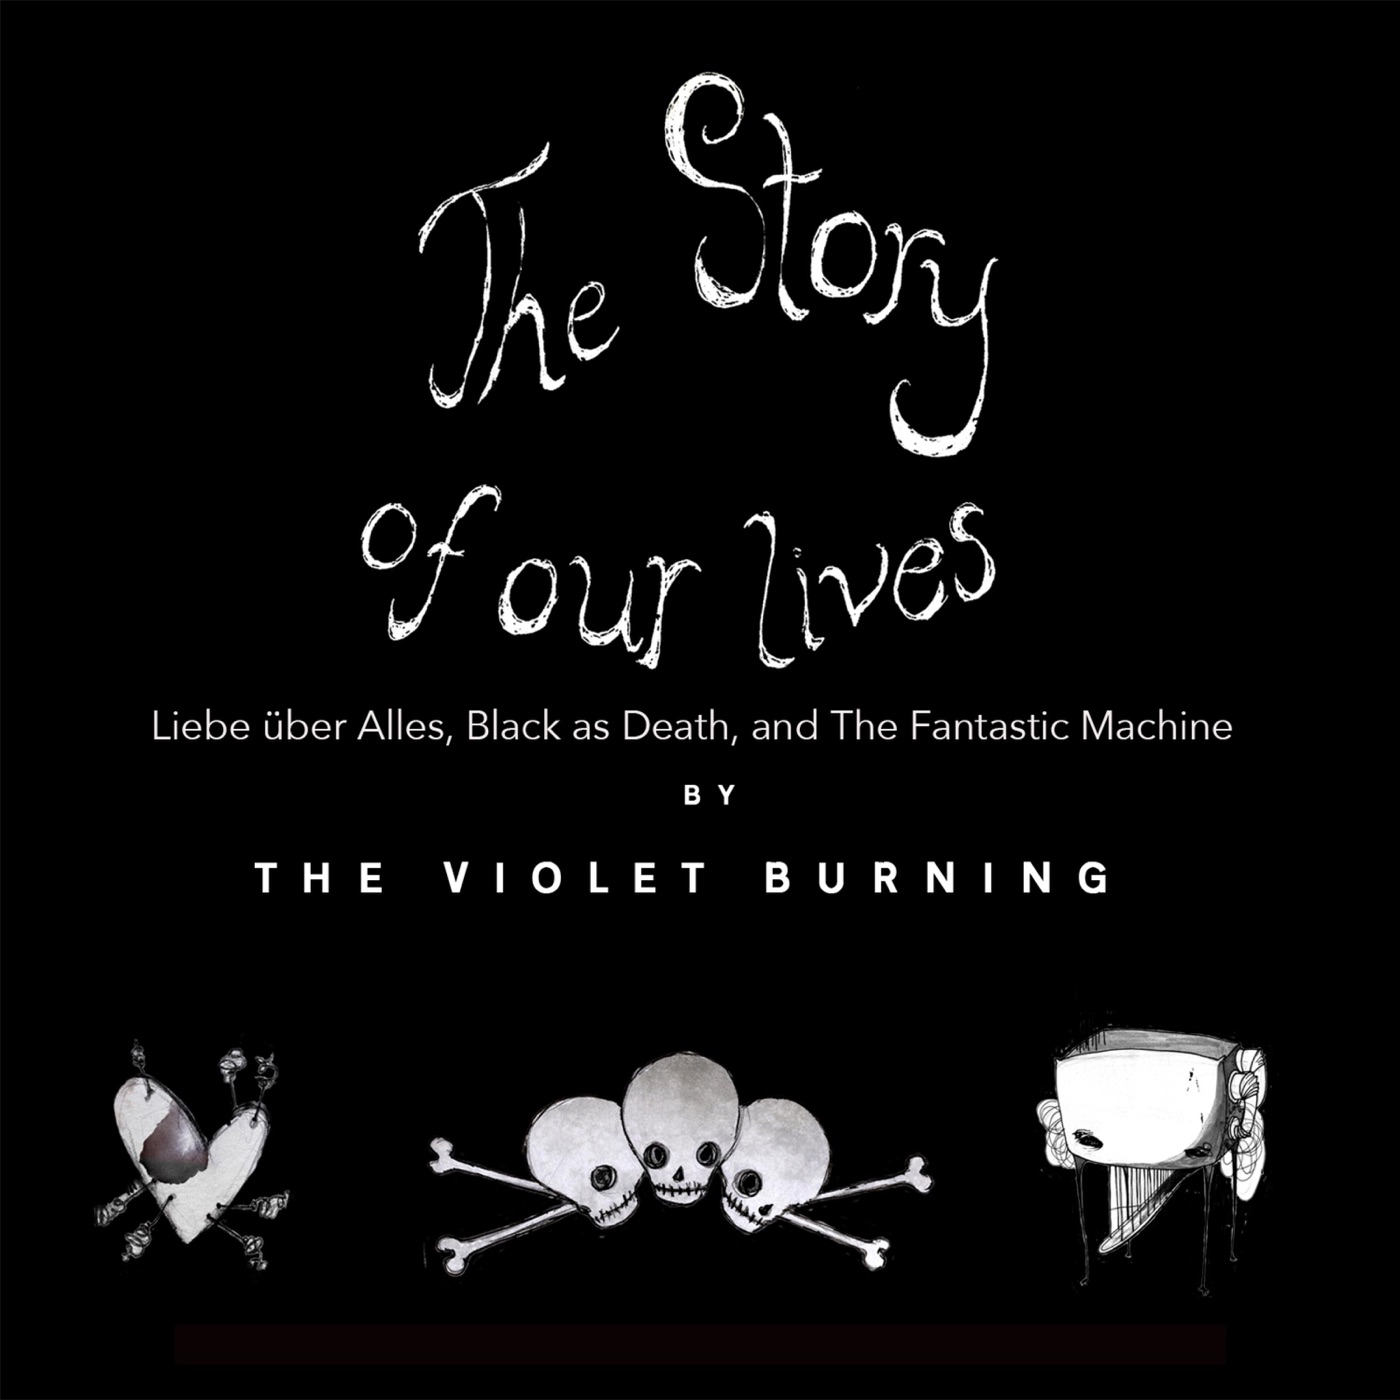 The Story of Our Lives - Liebe über Alles, Black as Death, And the Fantastic Machine by The Violet Burning